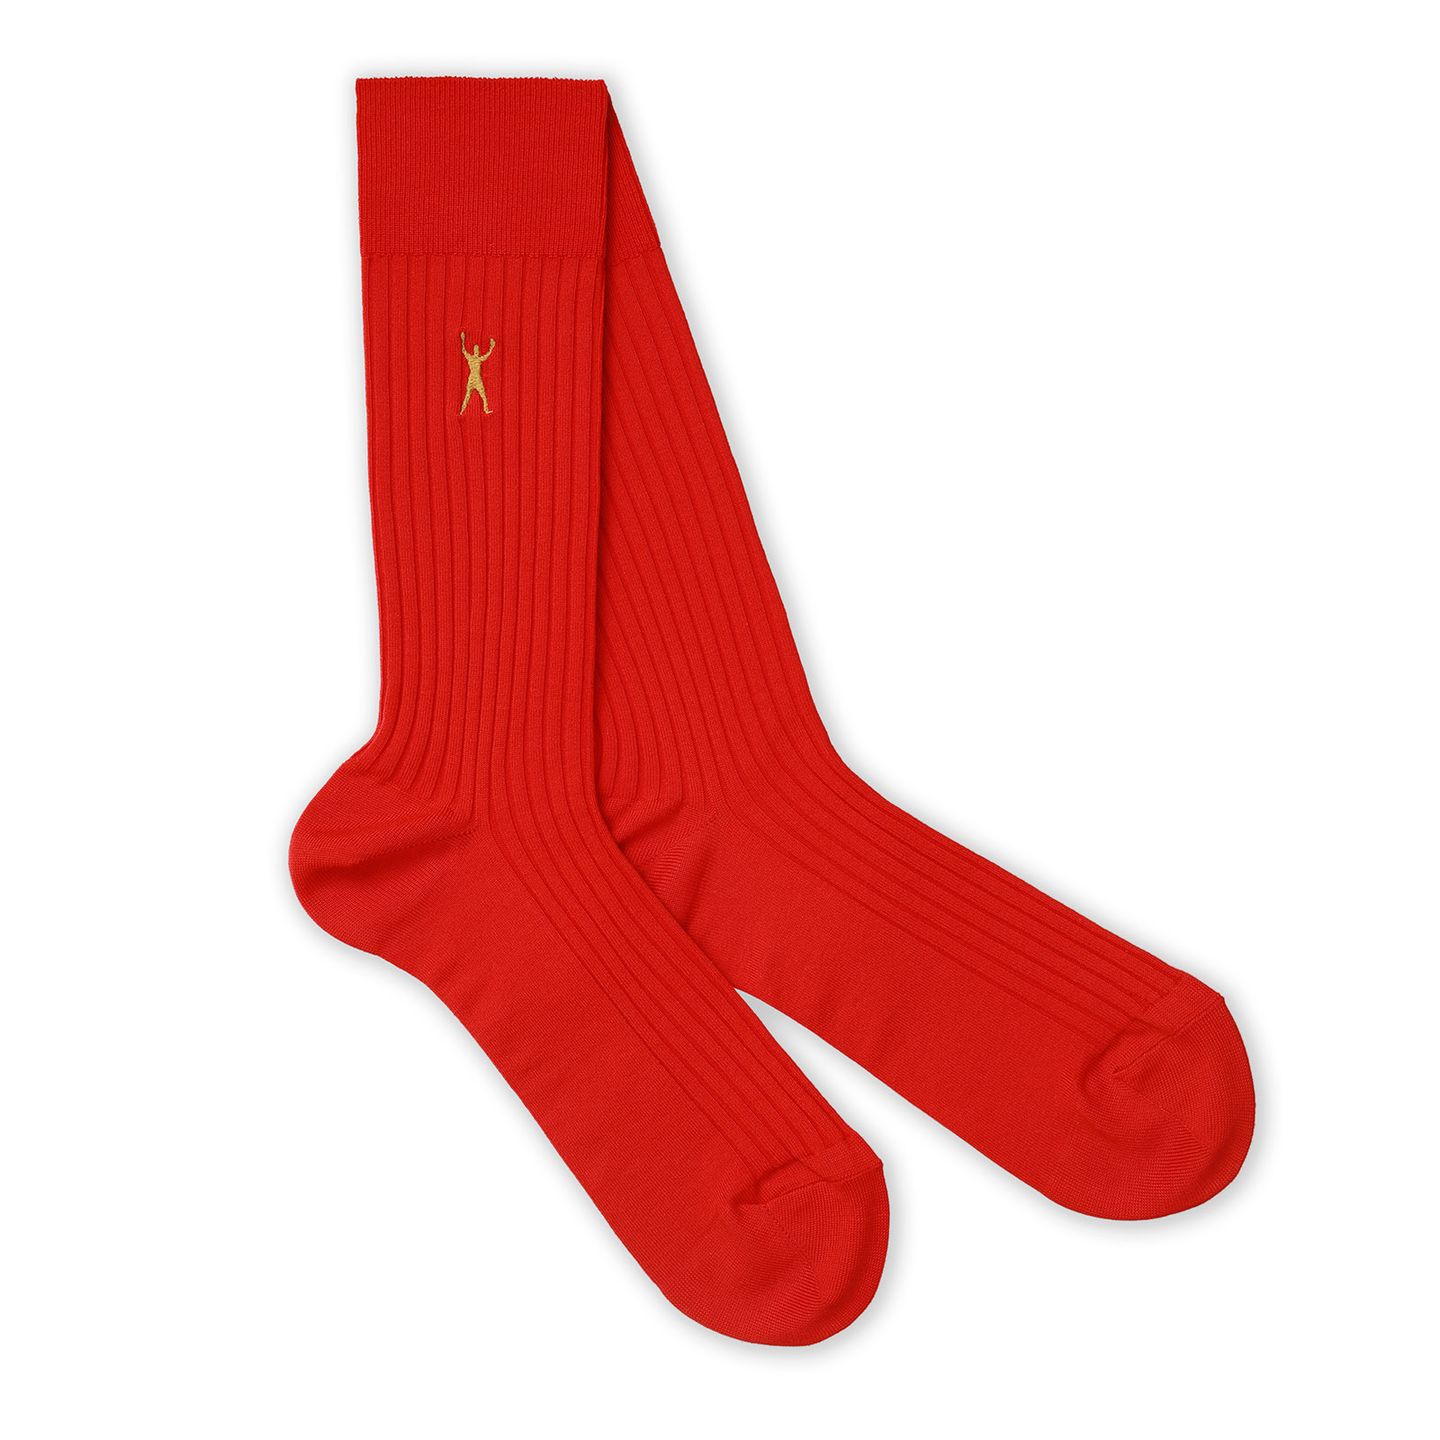 1 pair of Muhammad Ali socks in red with a gold logo